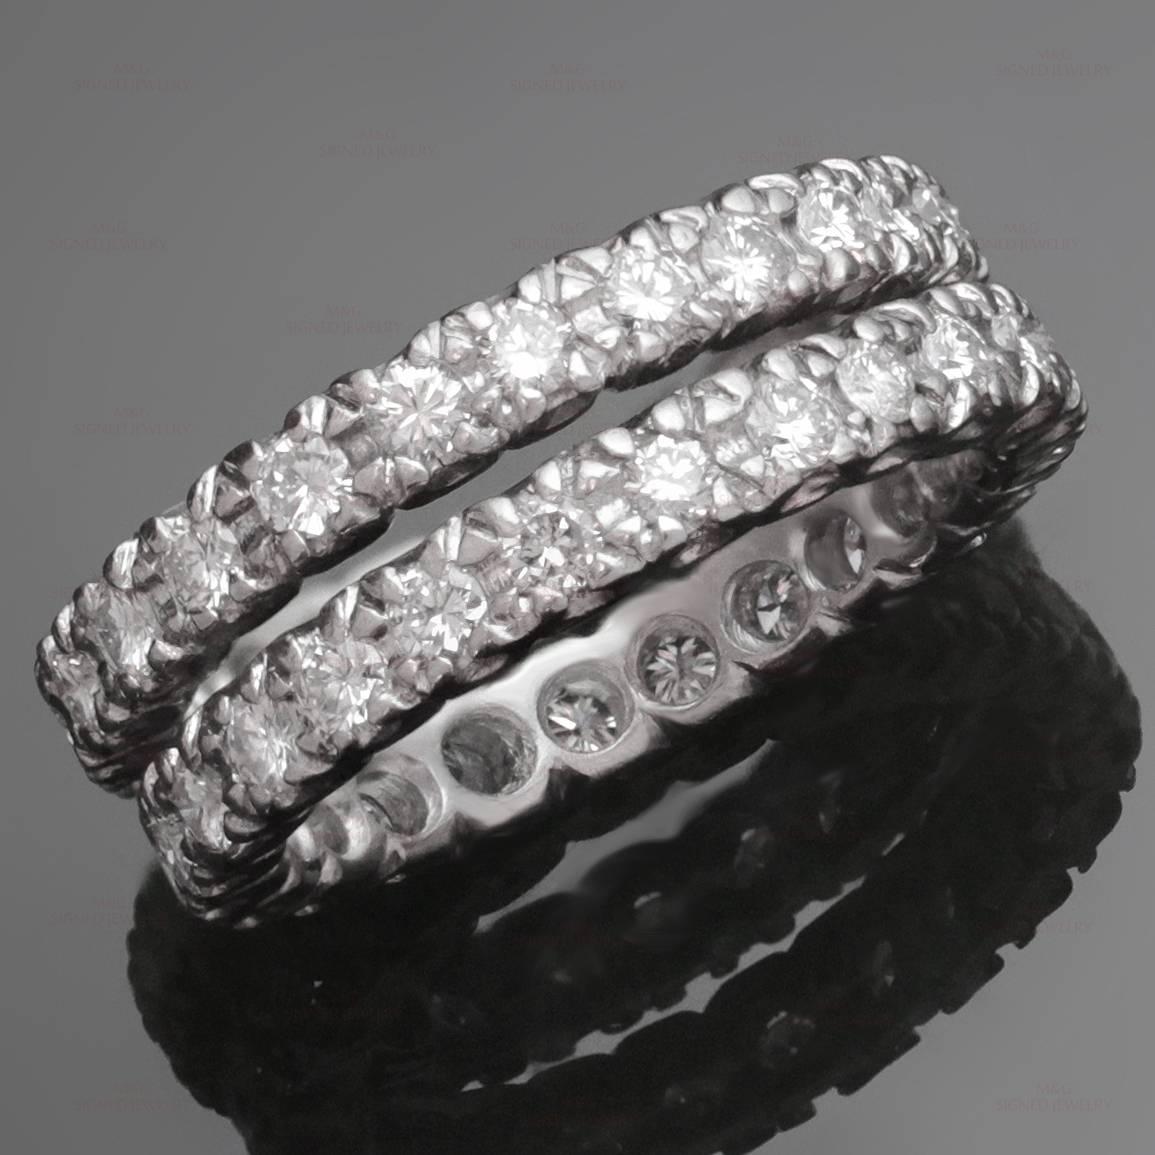 A pair of vintage ring guards made in fine platinum and beautifully set with sparkling round diamonds an estimated 2.40 carats. G-H color, VS1-VS2 clarity.
An elegant and versatile design. Measurements: 3mm (0.11